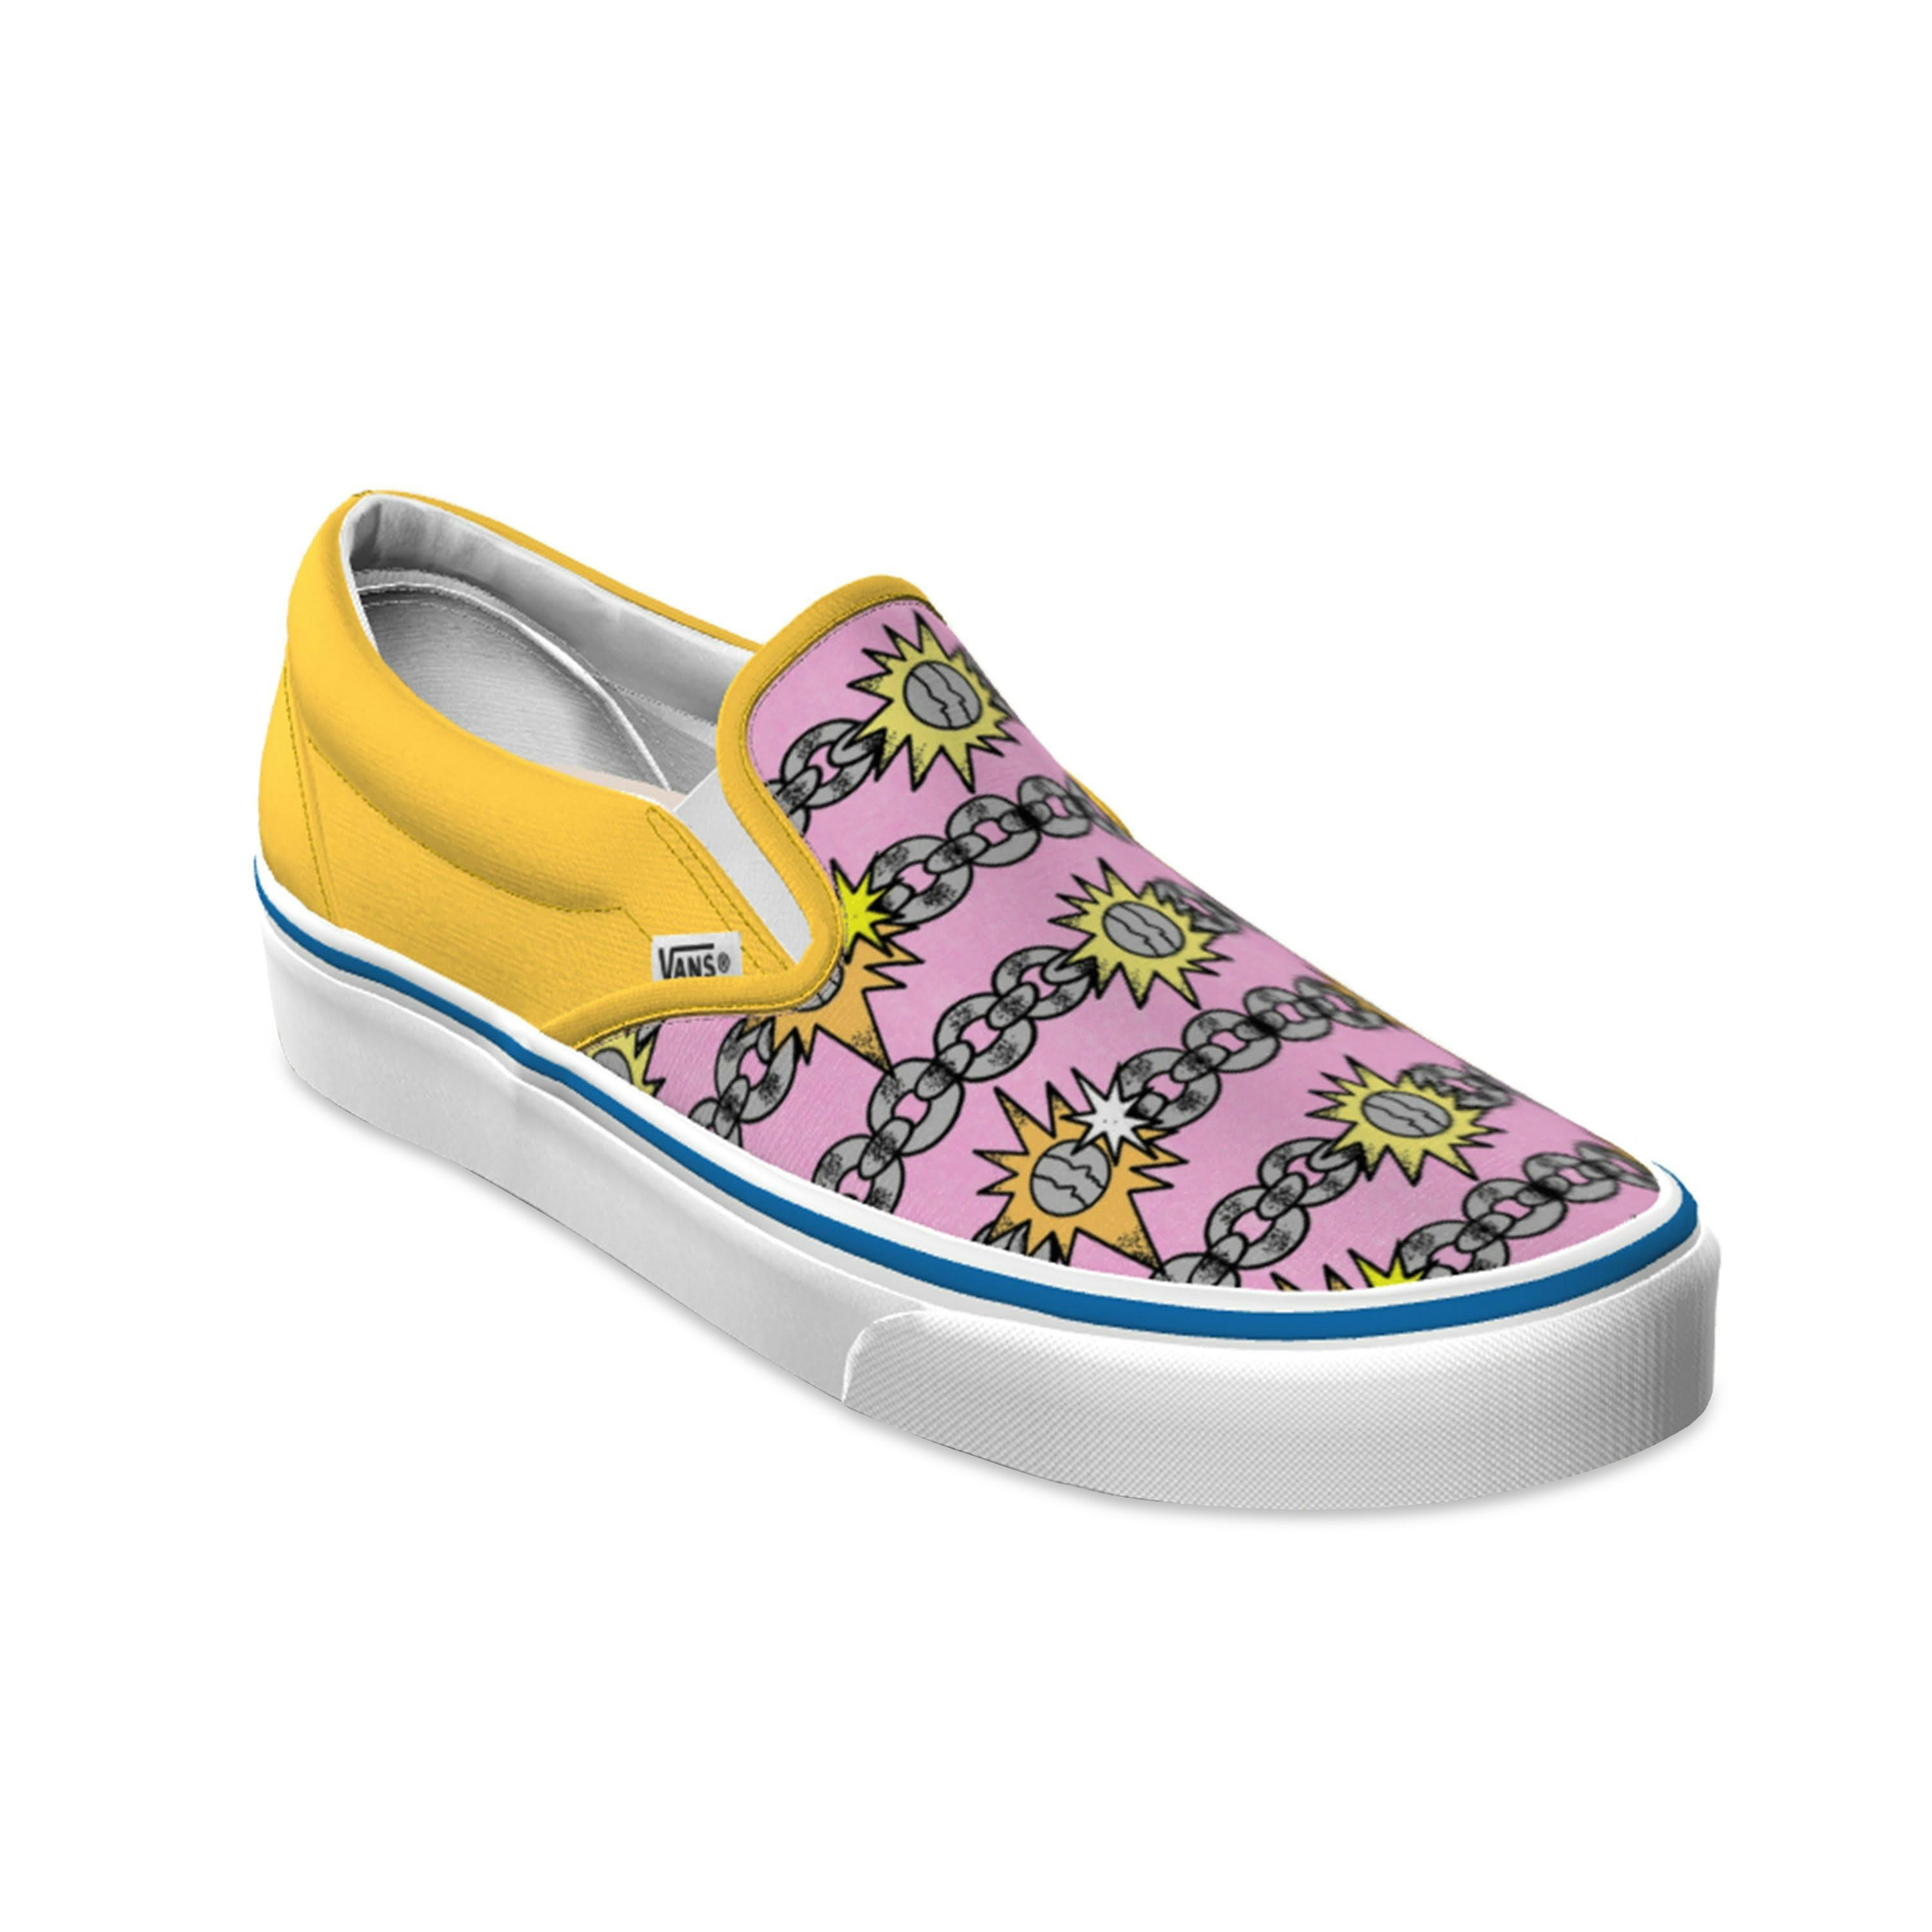 A yellow and pink vans slip-on shoe